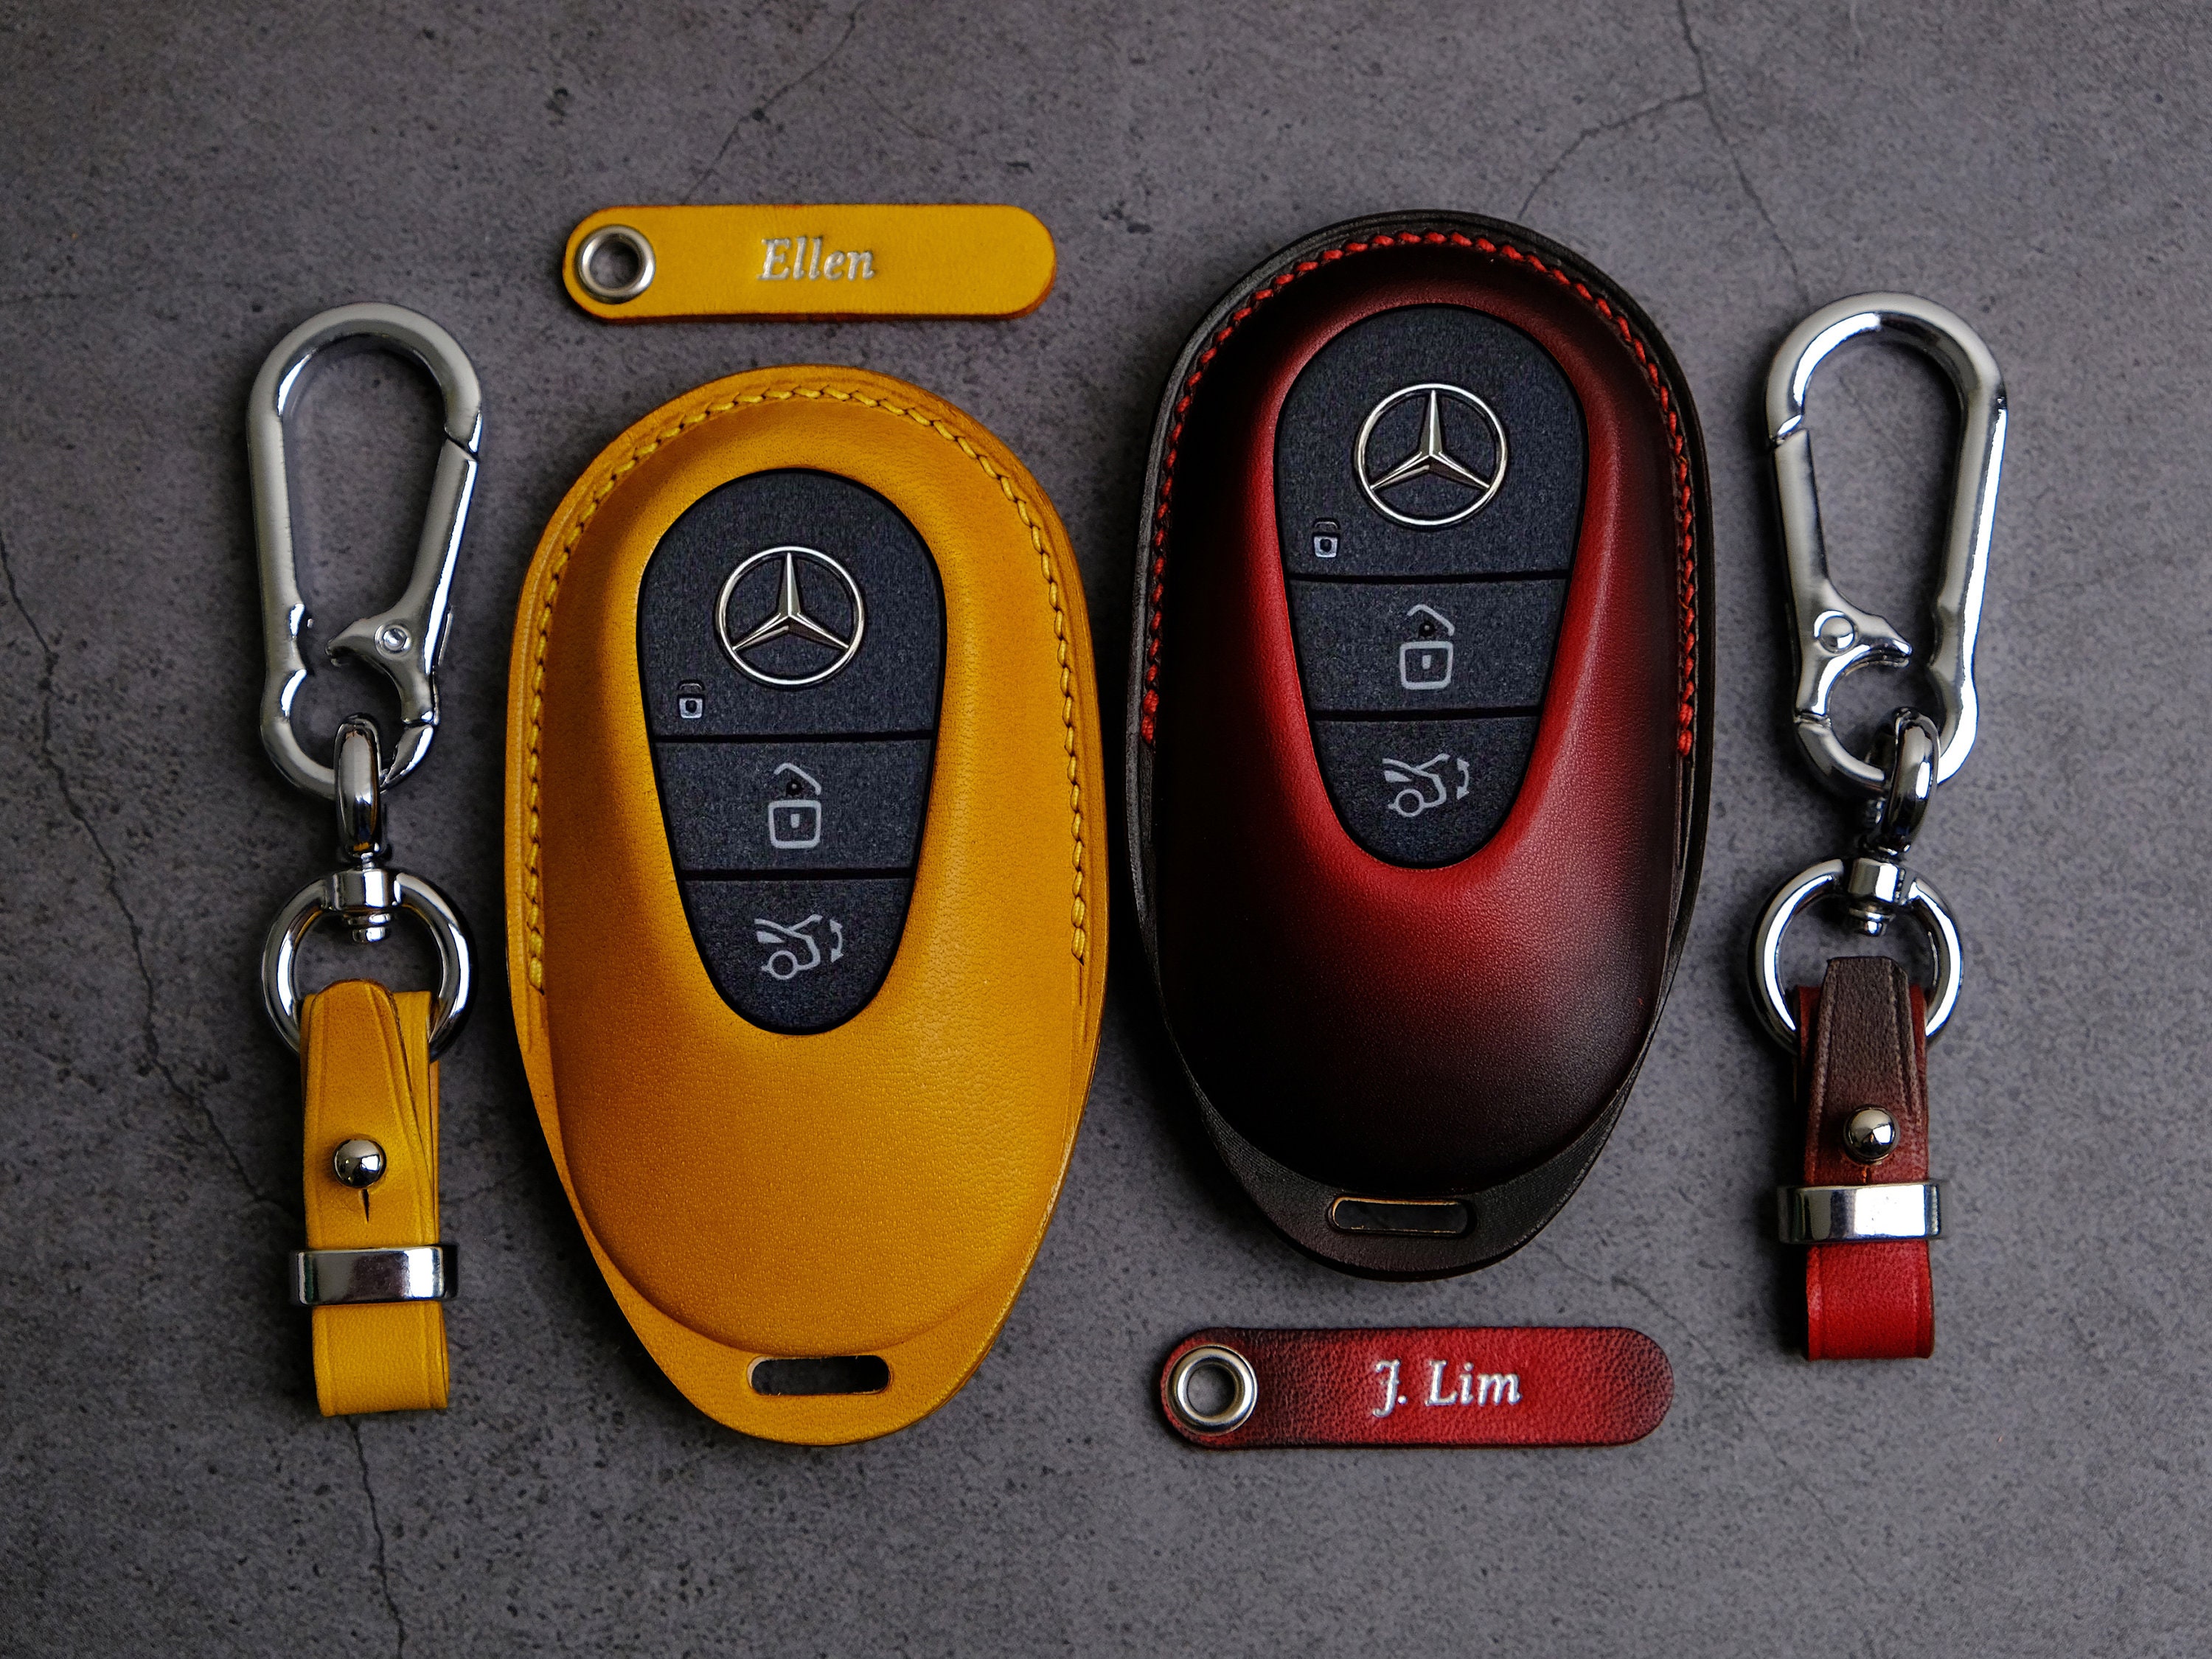  TPU Car Key Fob Cover Case Holder, for Mercedes-Benz W206 W223  S C Class S400 S400L S450 S450L S500 S500L Keychain Accessories : Automotive